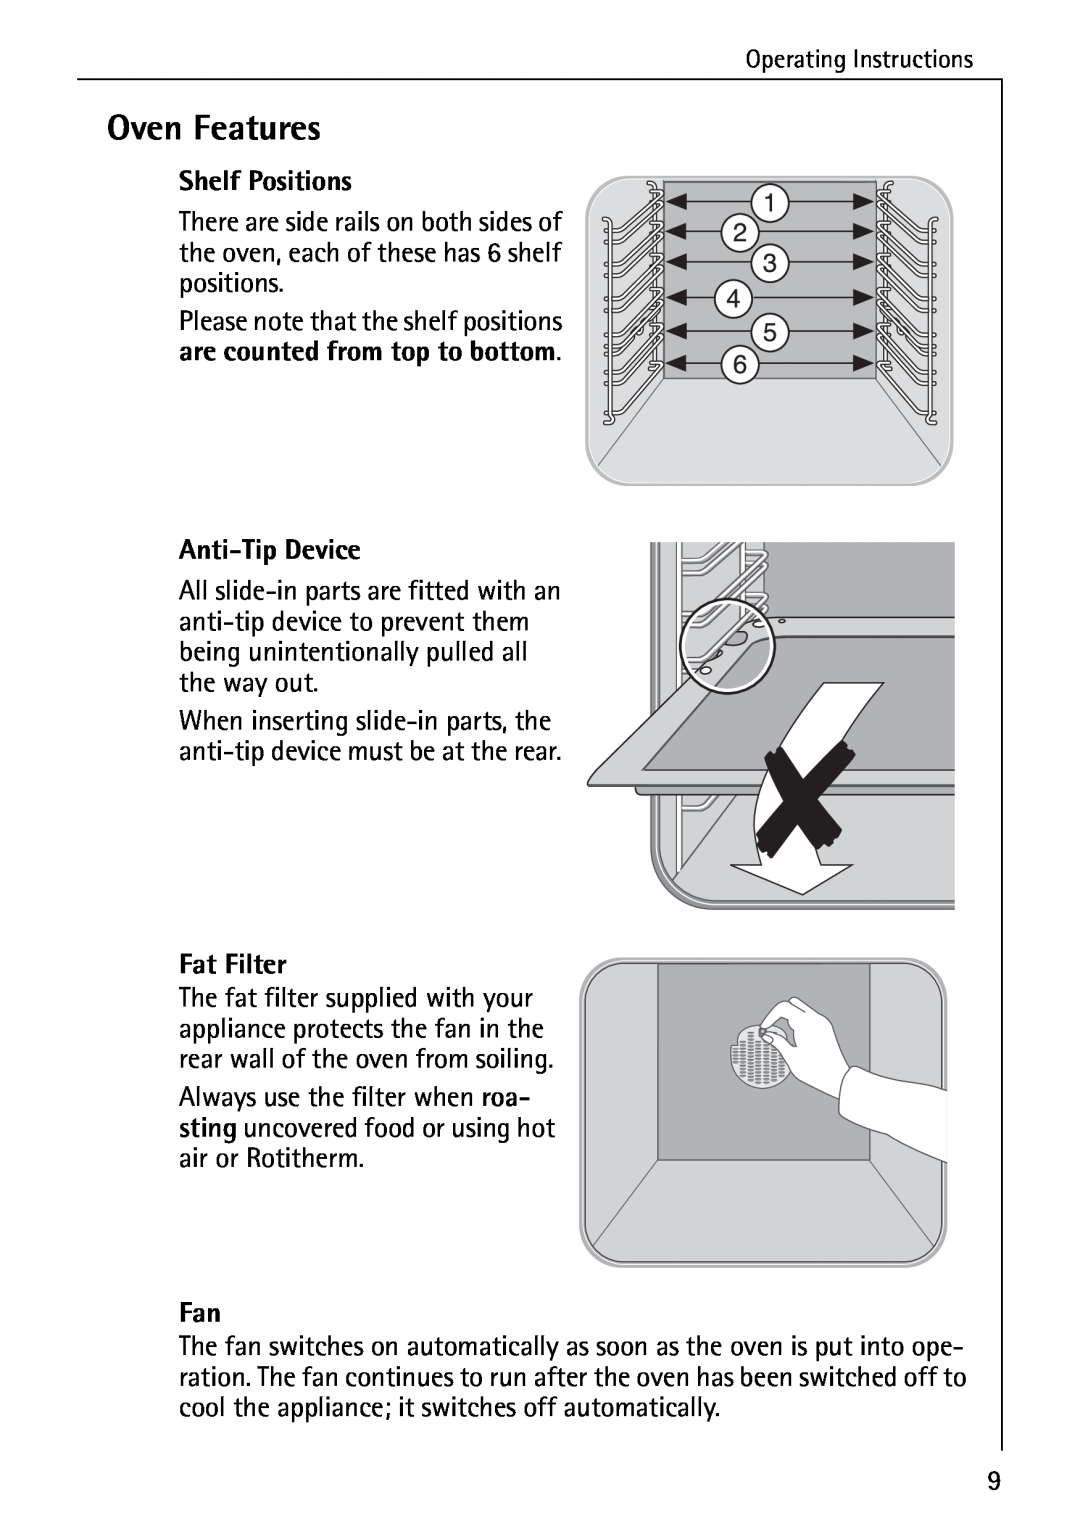 AEG B 4100 operating instructions Oven Features, Shelf Positions, Anti-TipDevice, Fat Filter 